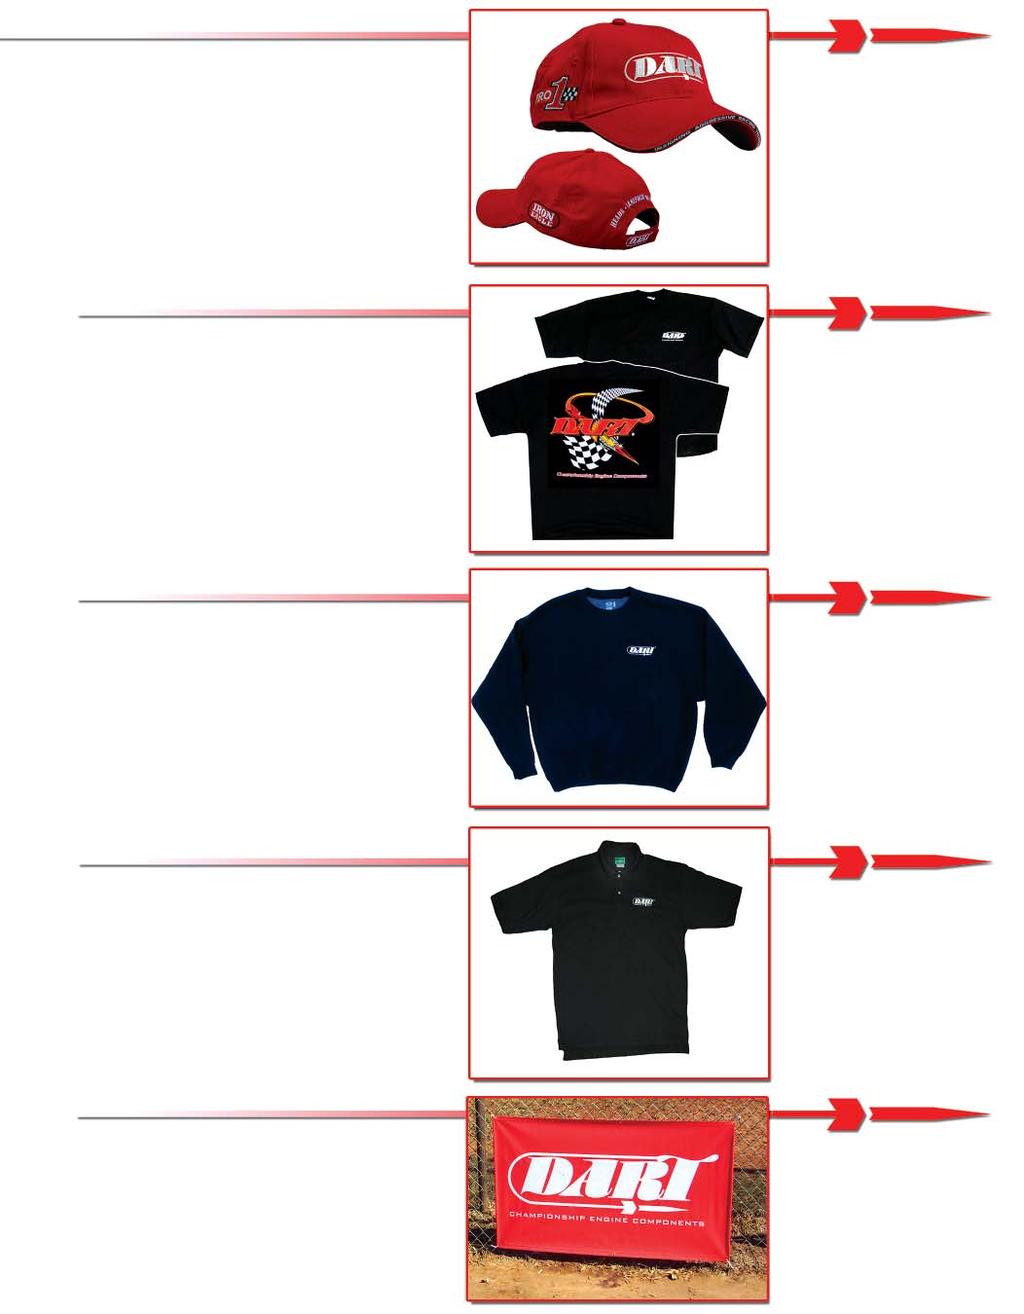 Dart Apparel 101 Show your colors with Dart gear.